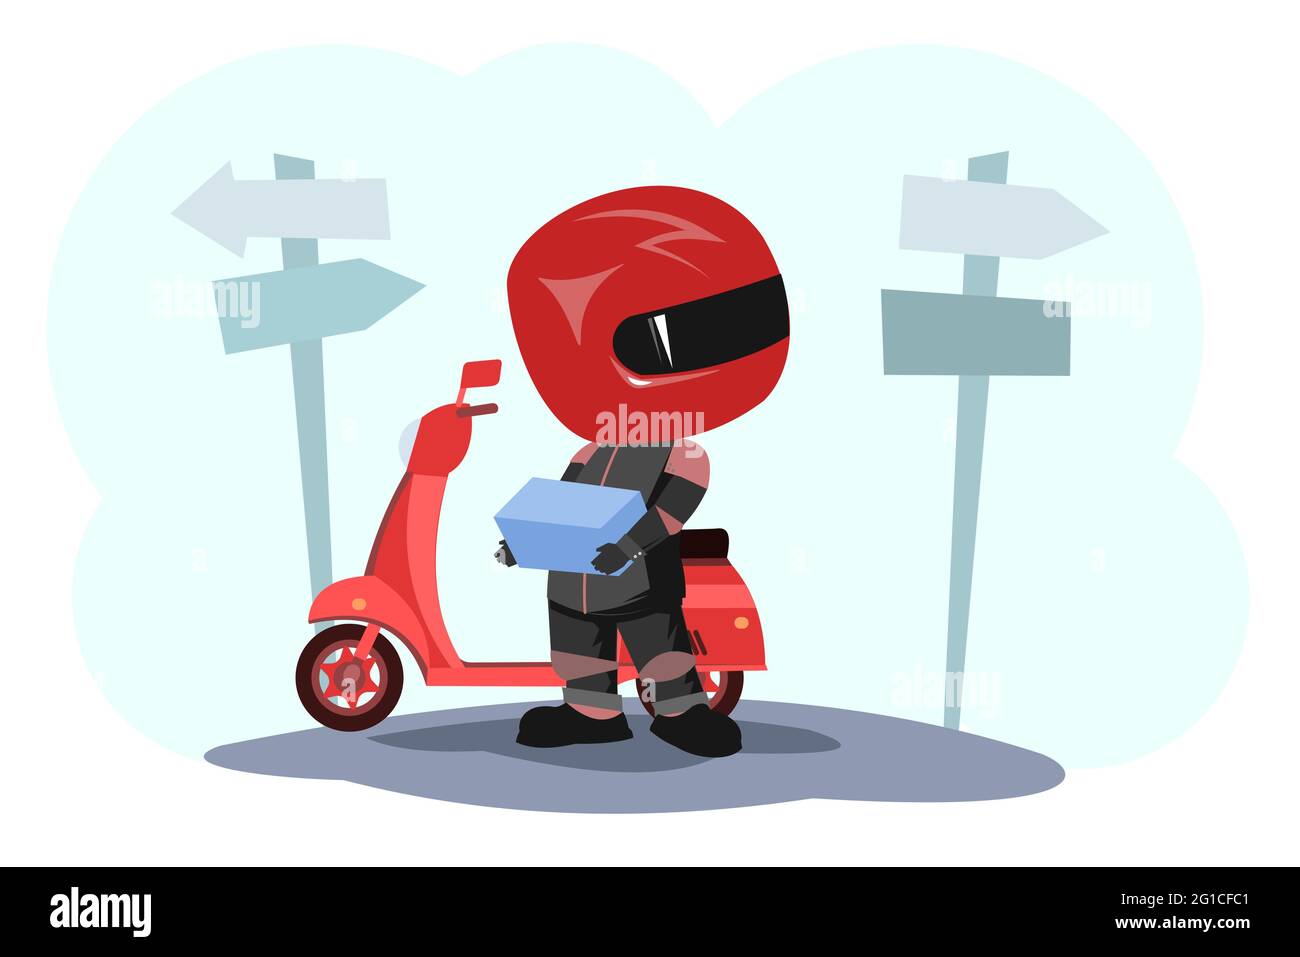 Scooter driver. Biker Cartoon. Child illustration. Lost. In a sports uniform and a red helmet. Cool motorcyclist. Isolated on white background. Vector Stock Vector